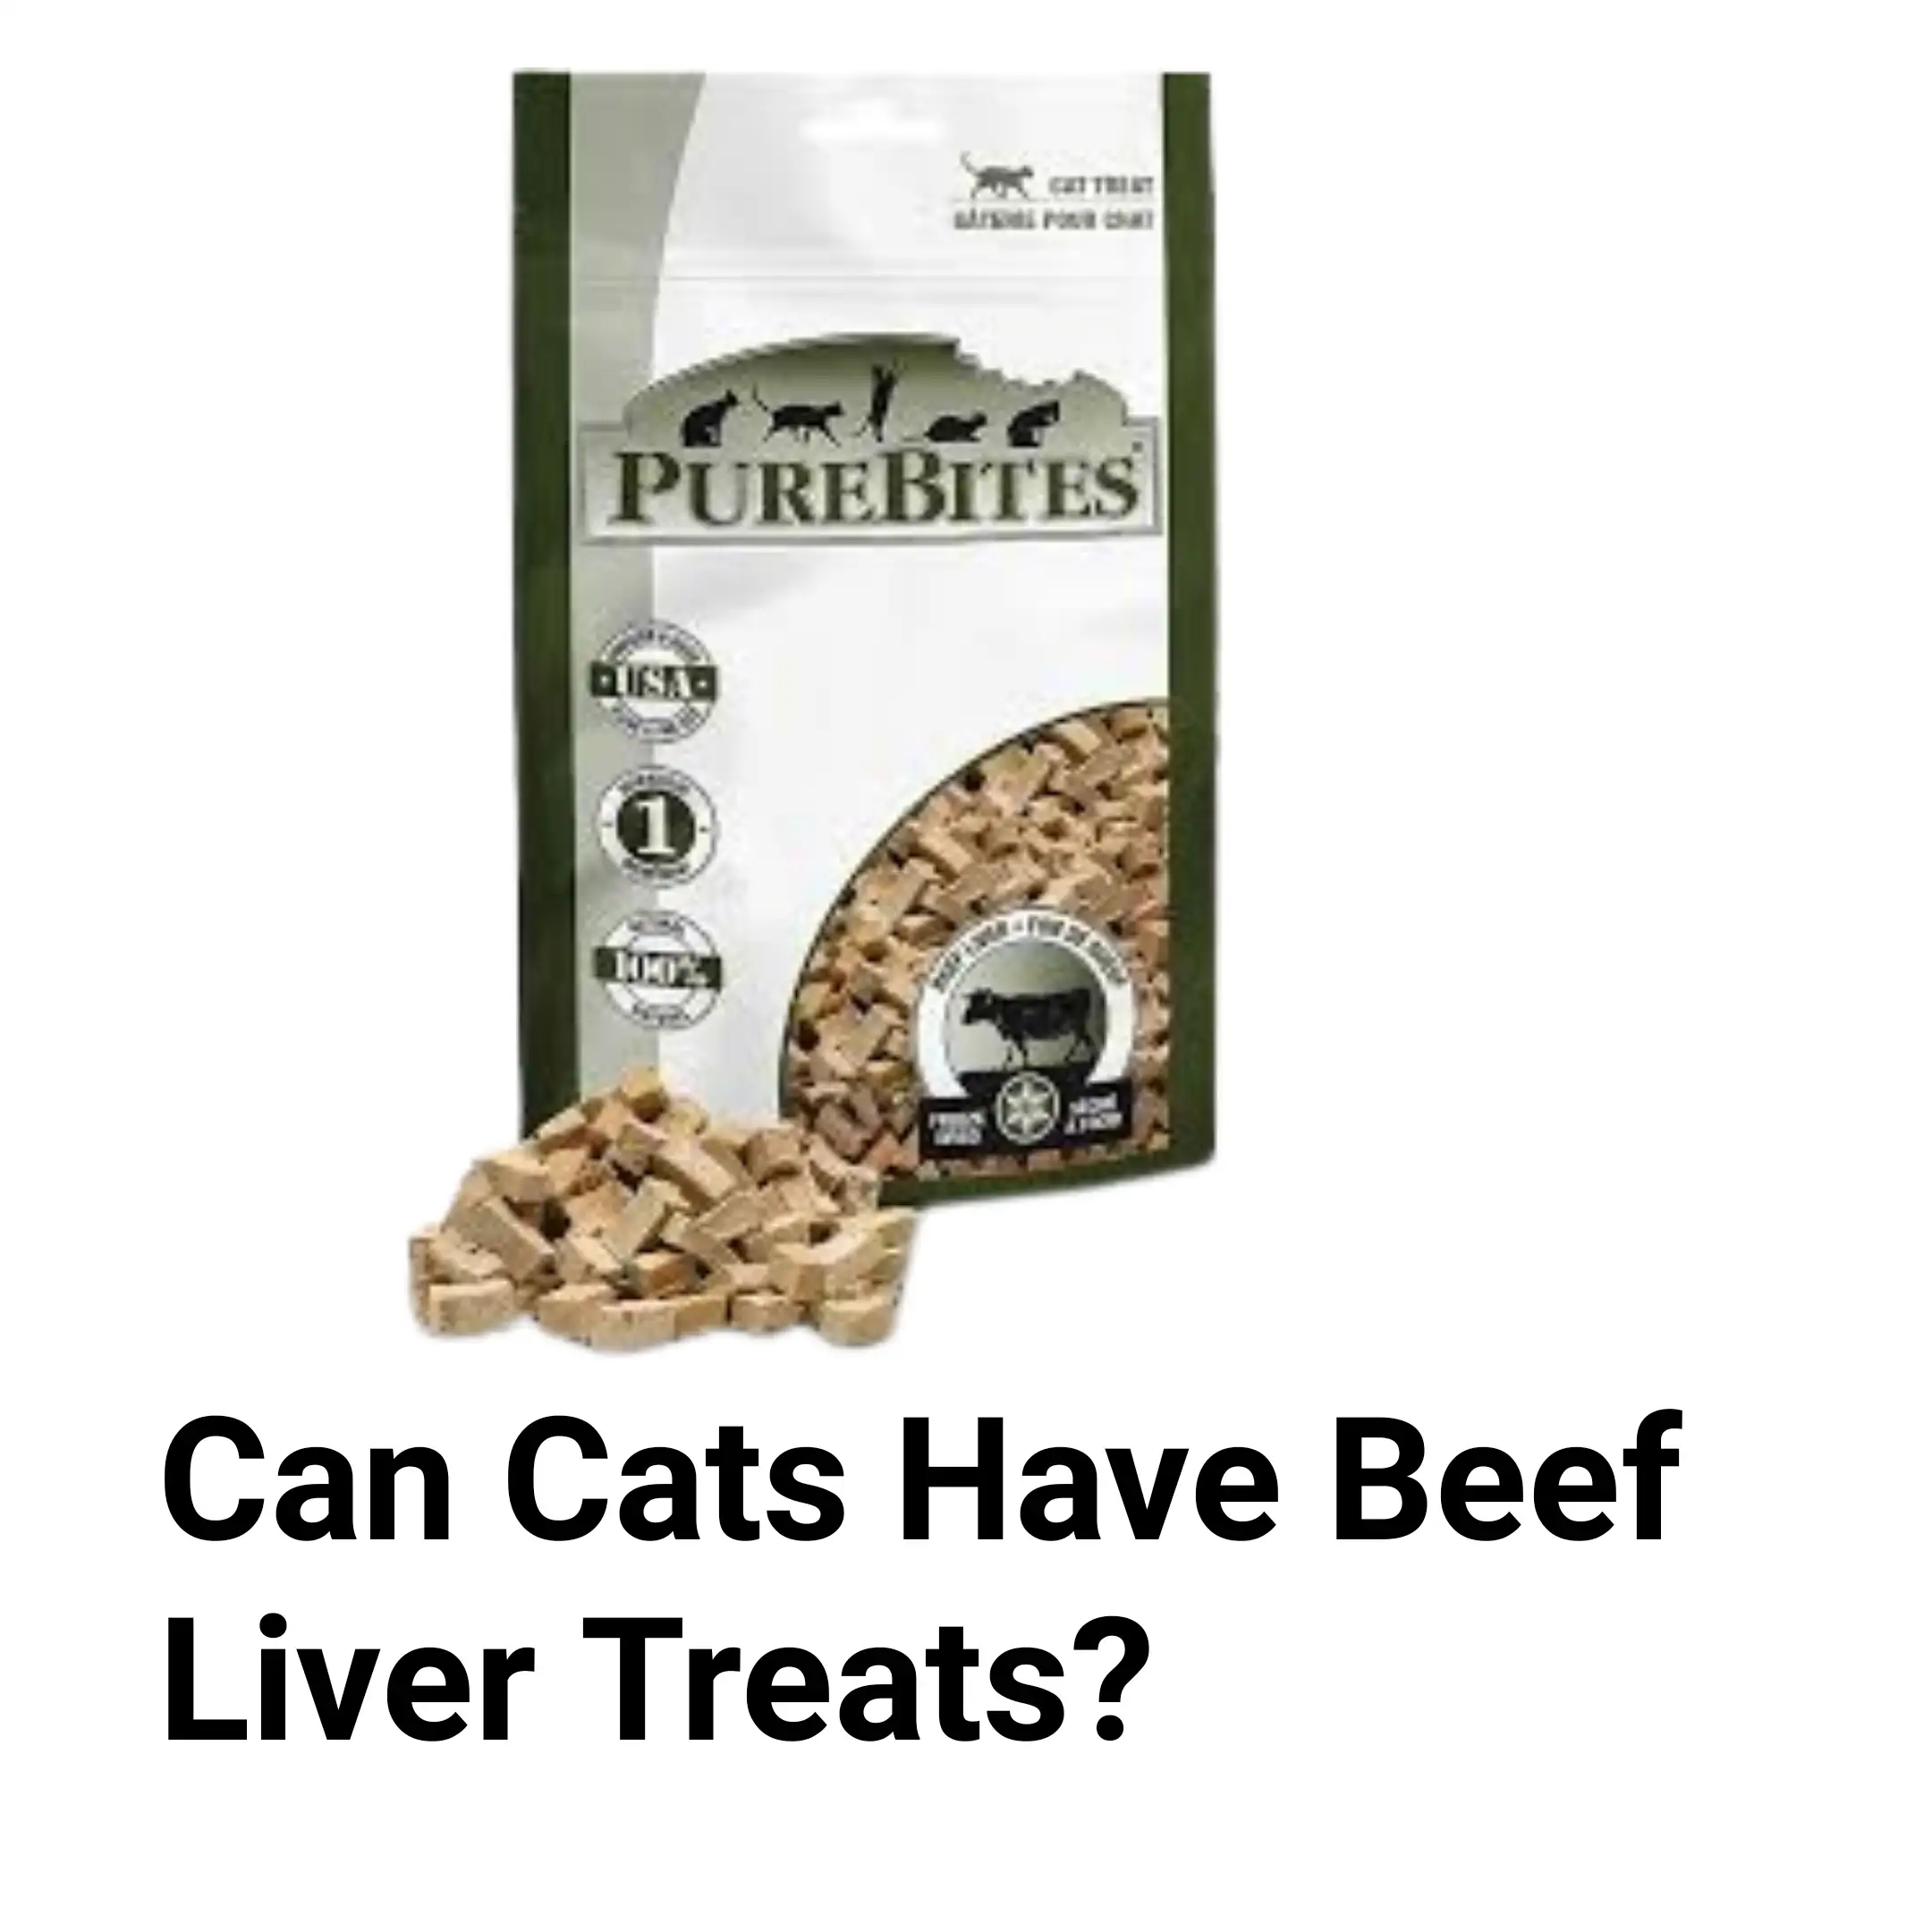 Can Cats Have Beef Liver Treats?